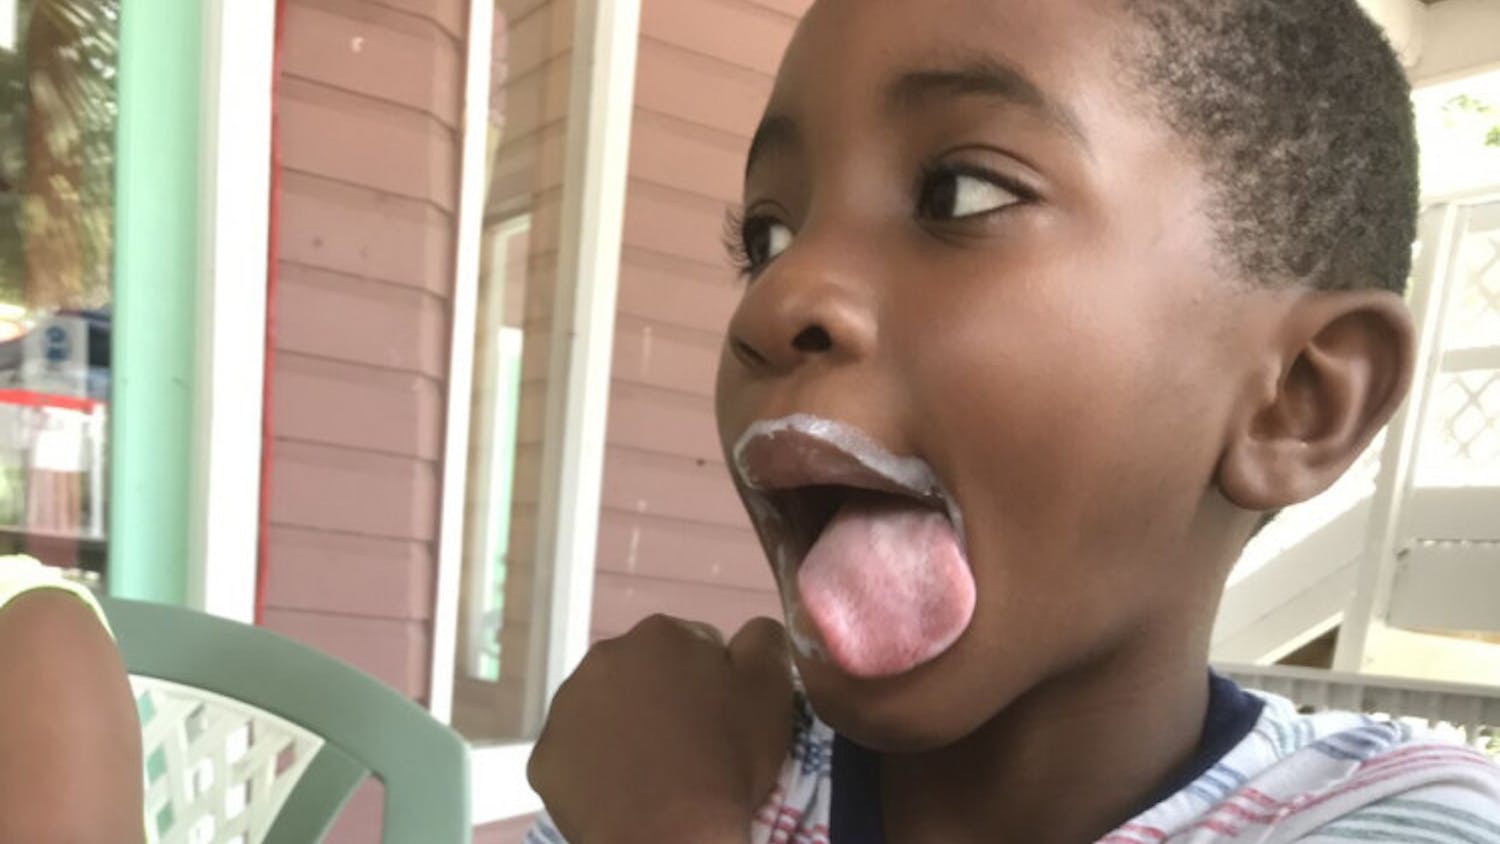 With typical activities canceled, visiting ice cream shops became a popular pastime for Boys 2 Men summer camp participants.